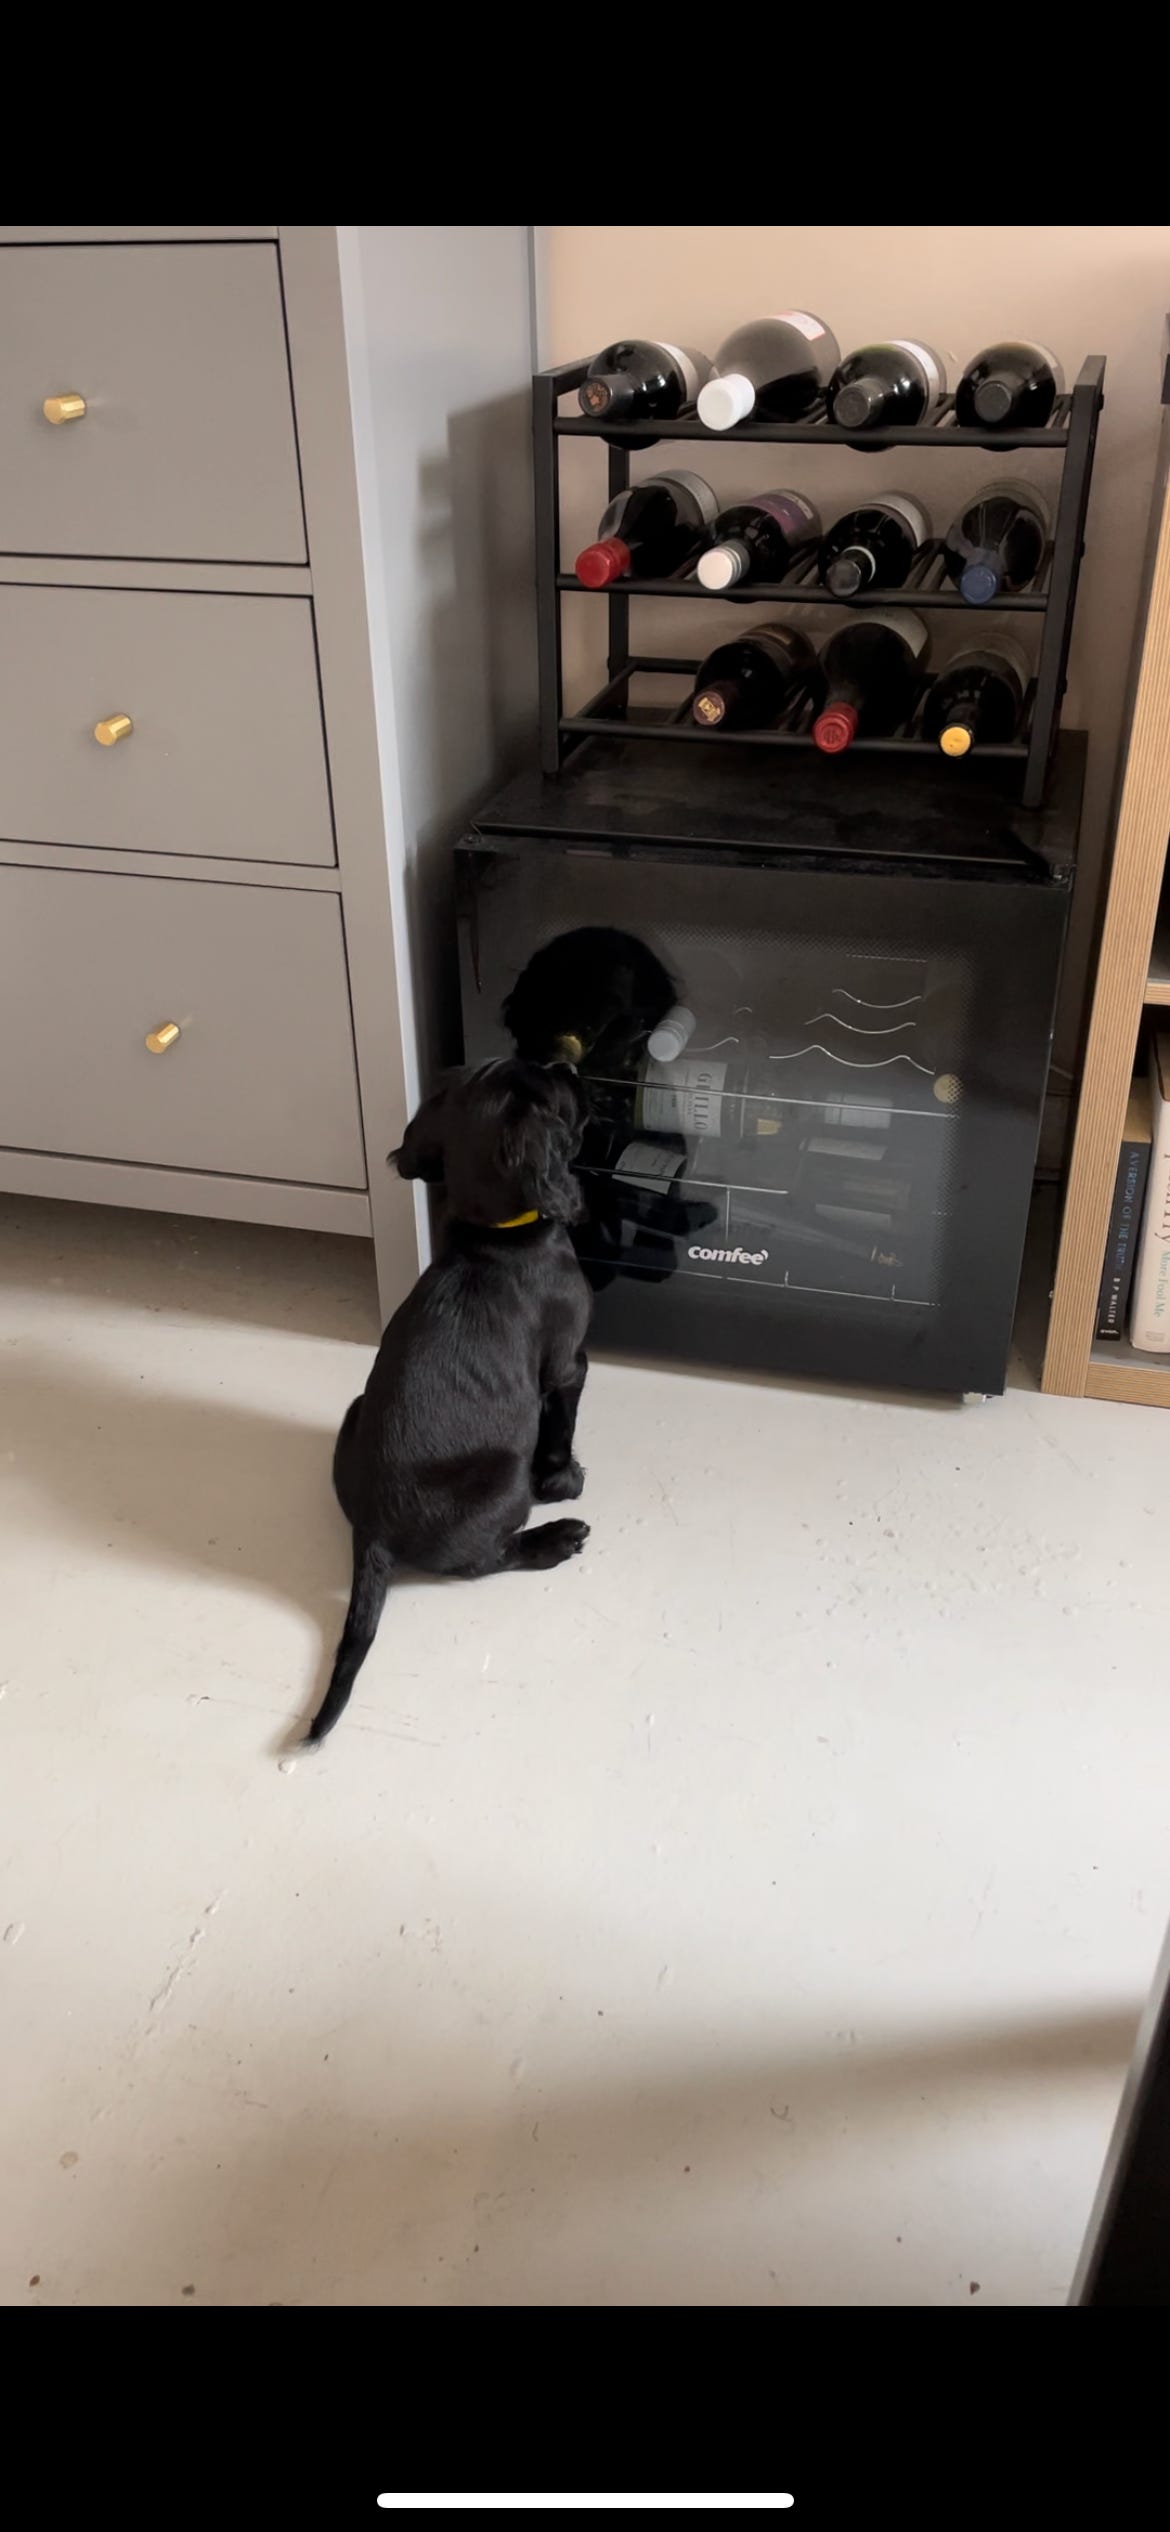 A cocker spaniel puppy looking at a collection of wine